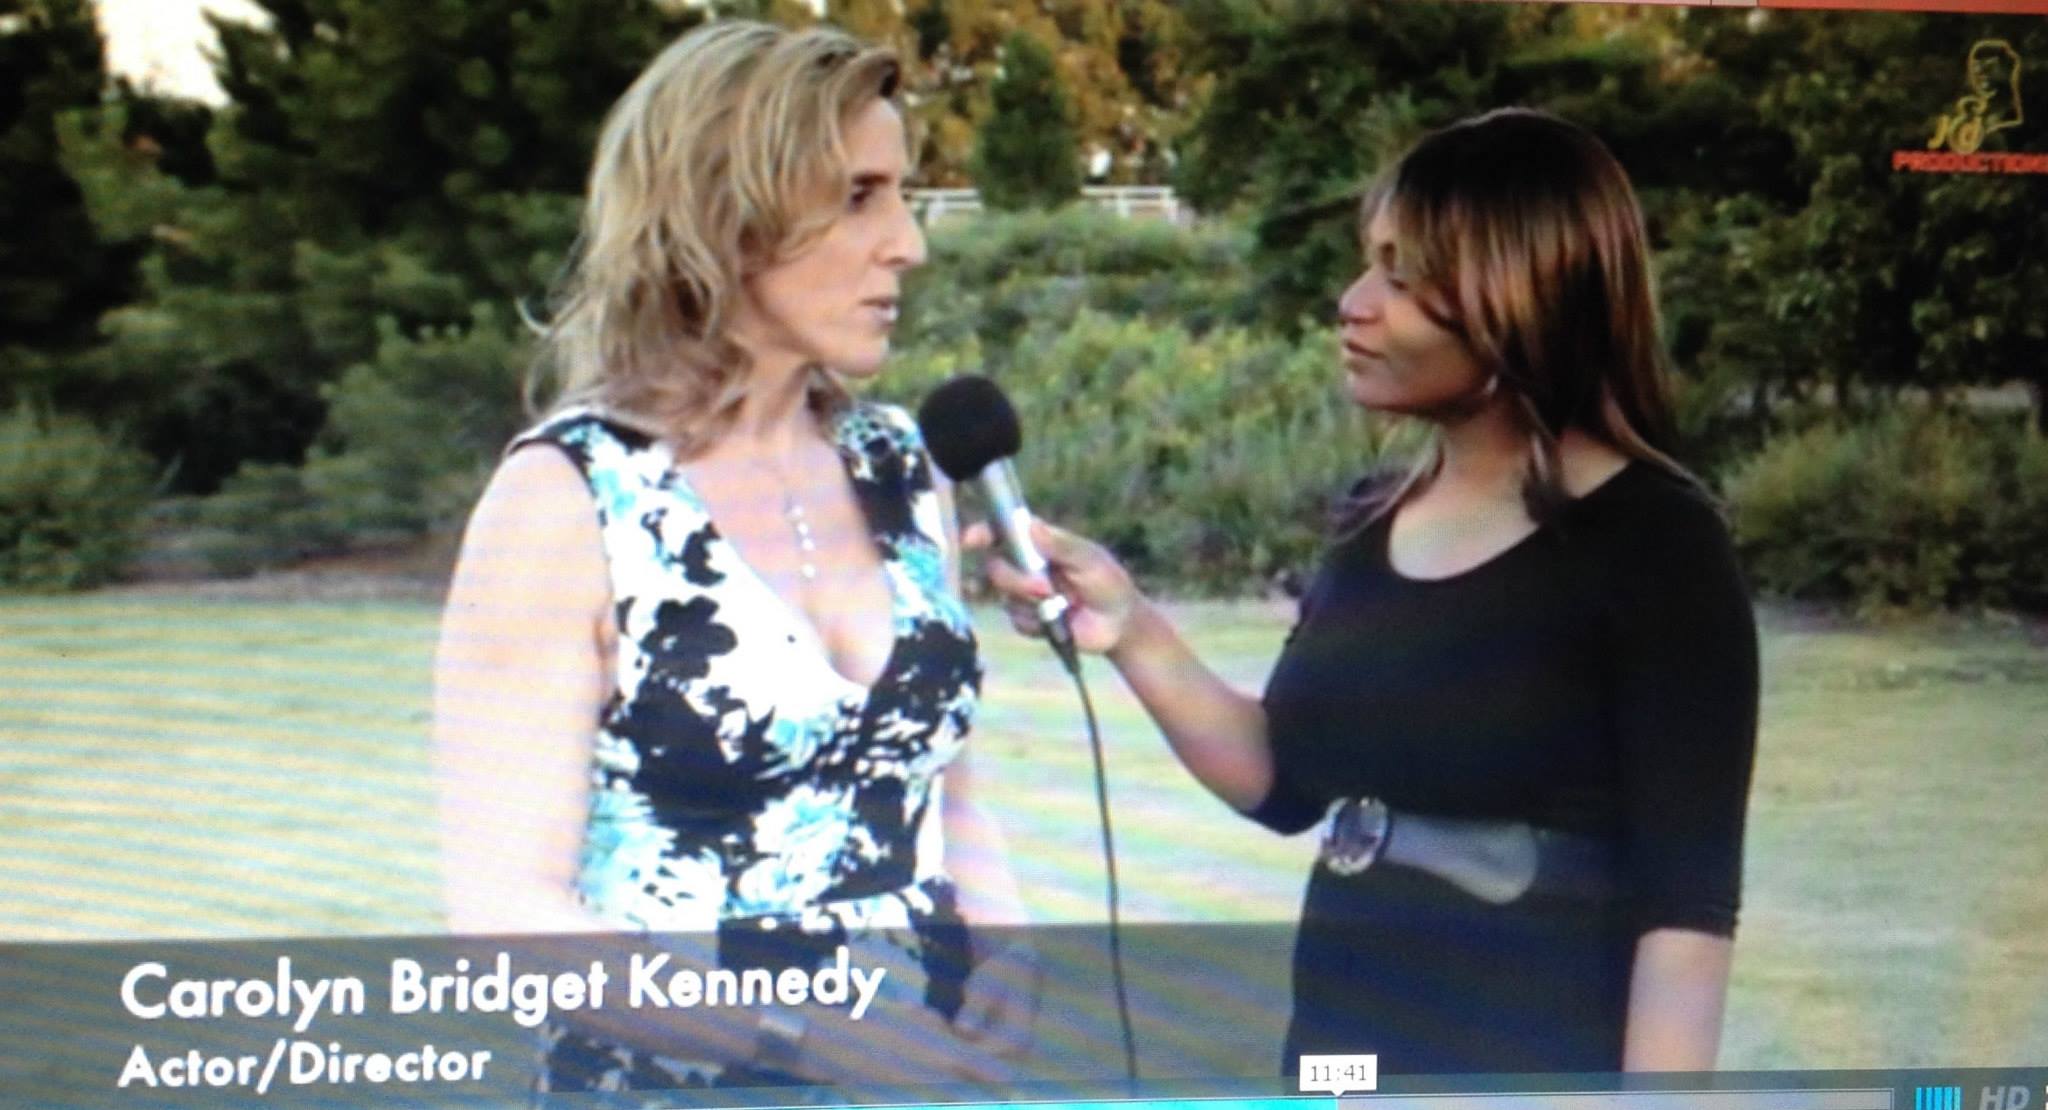 Carolyn Bridget Kennedy being interviewed at the 